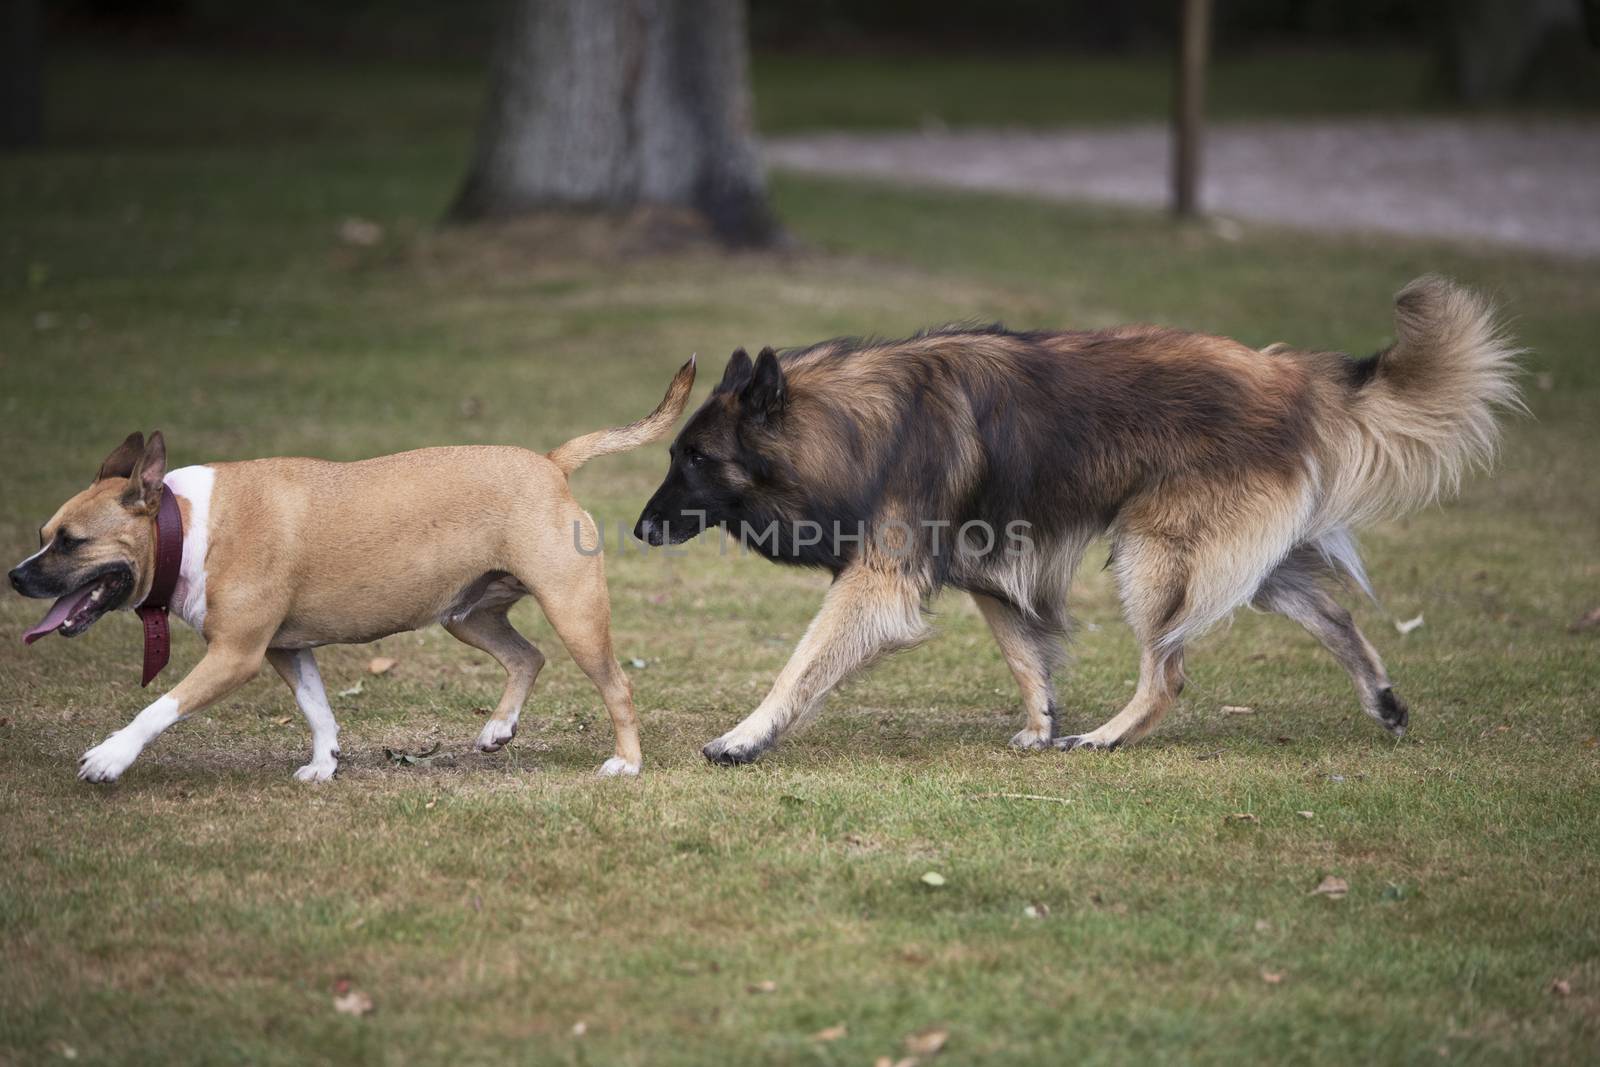 Two dogs chasing each other, Staffordshire bull terrier and Belg by avanheertum